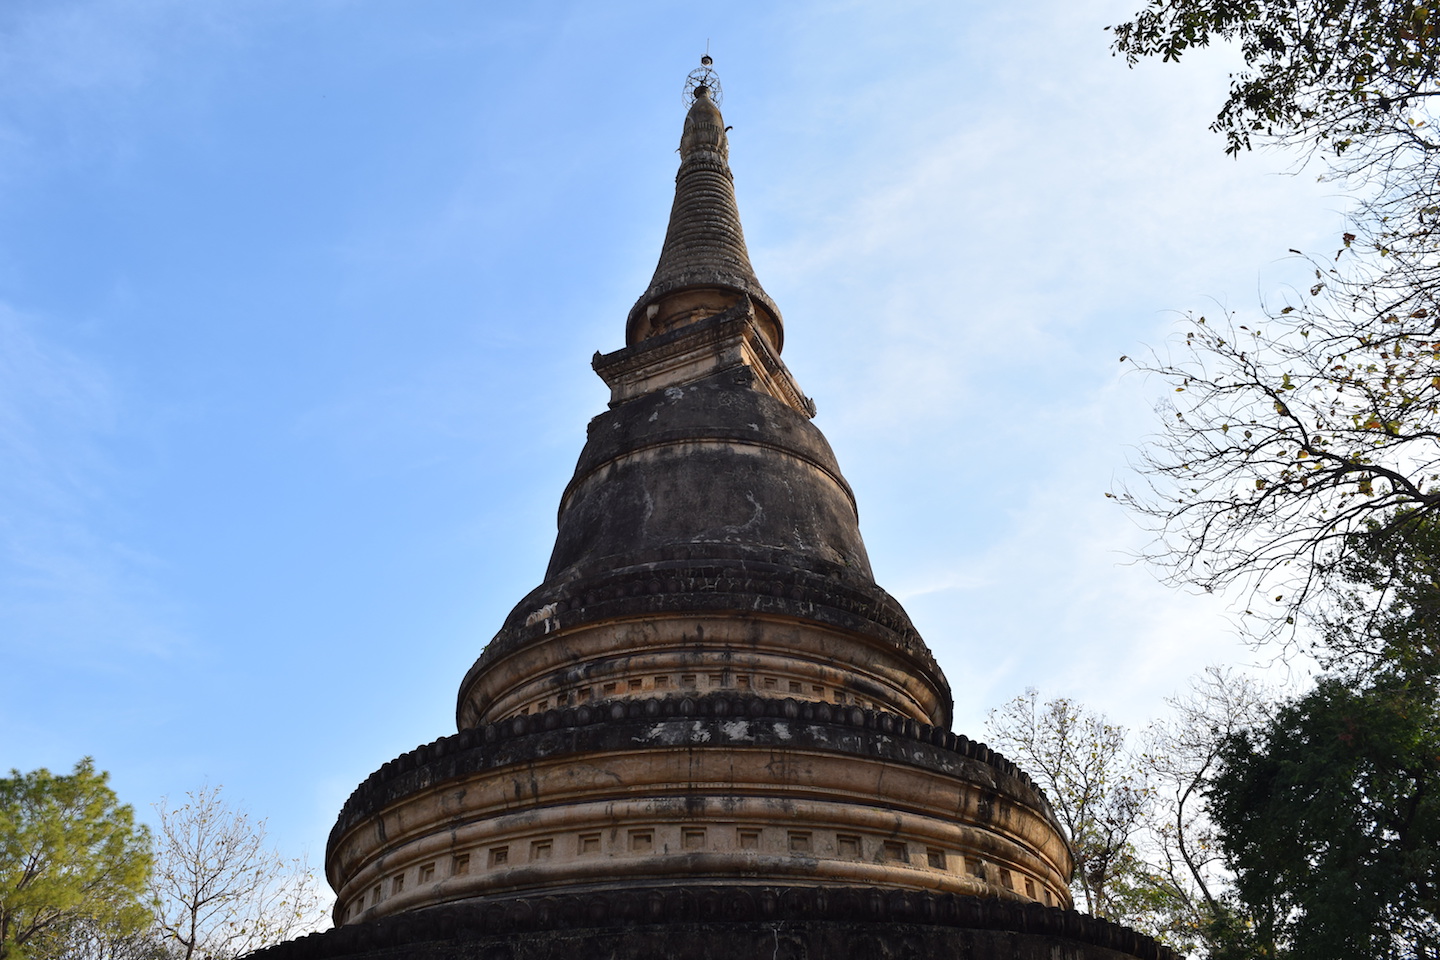 A temple located in the center of the Sokothai 'old city' national park.